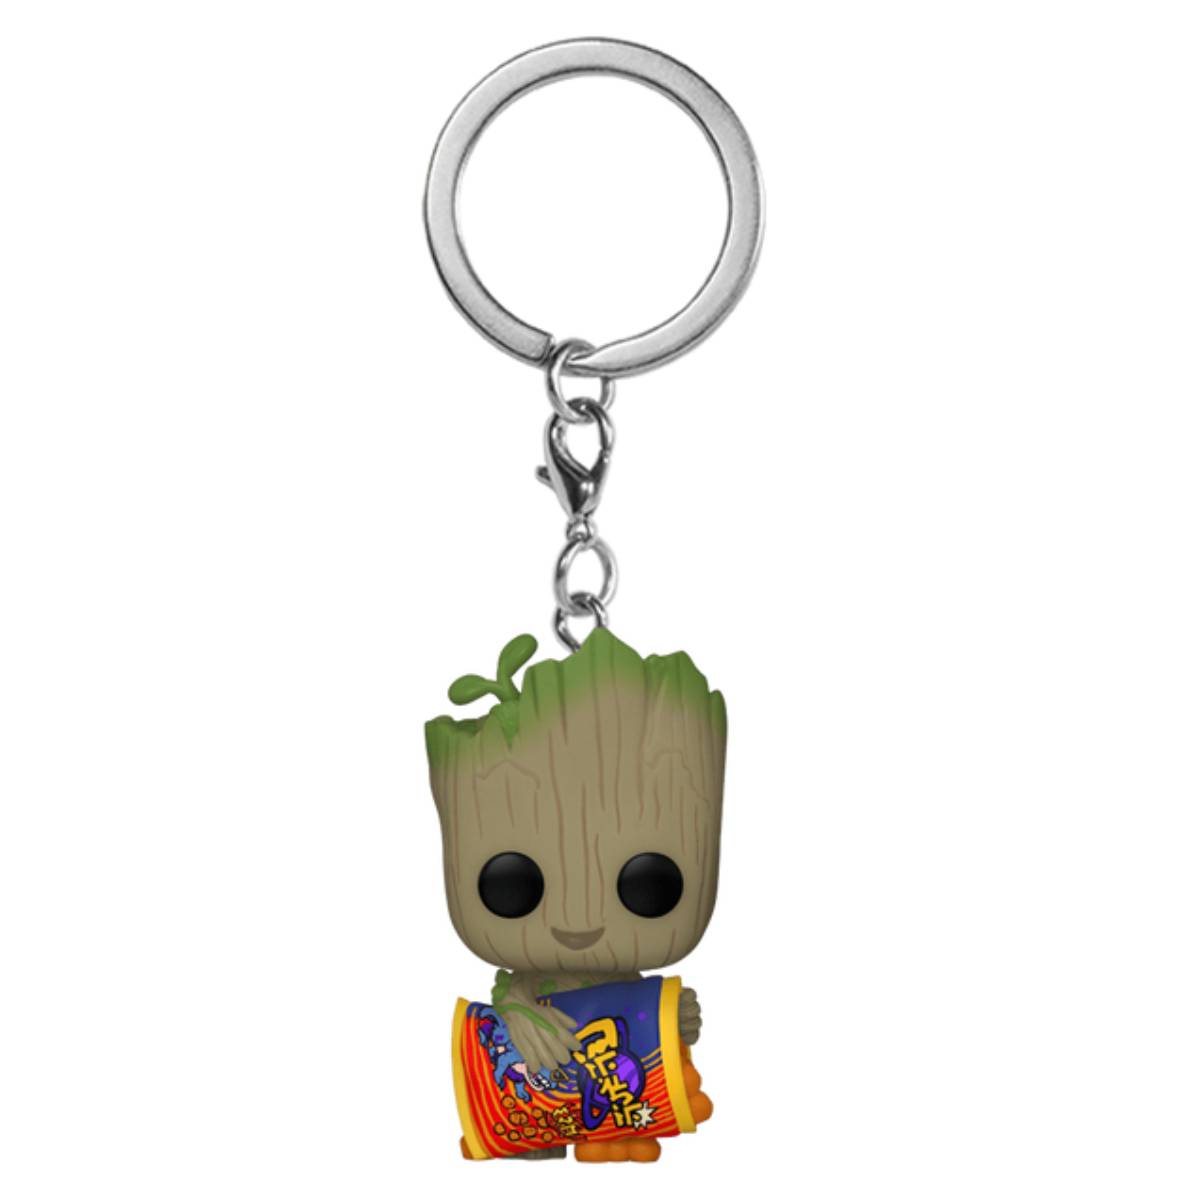 FUNKO KEYCHAIN MARVEL STUDIO I AM GROOT GROOT WITH CHEESE PUFFS